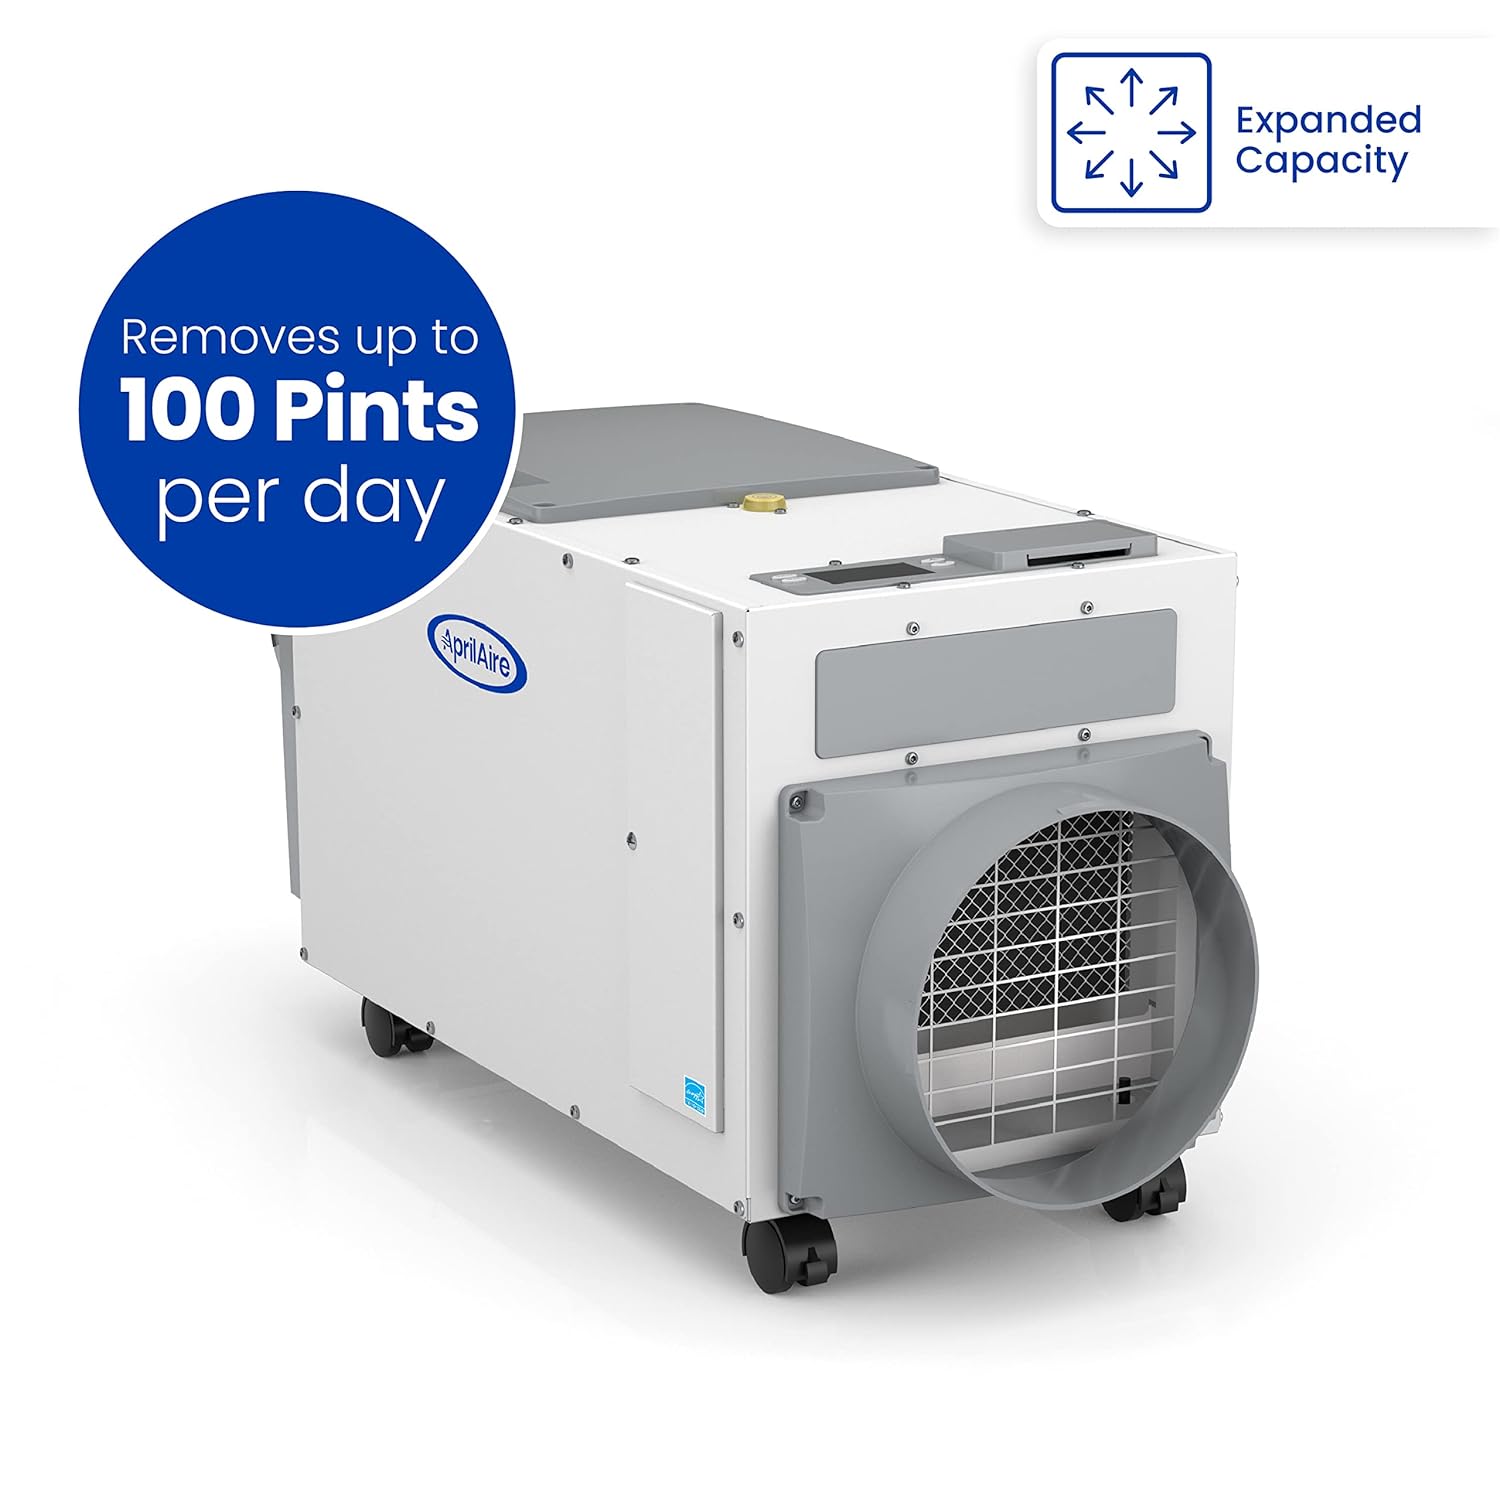 AprilAire E100C Pro 100-Pint Whole-House Dehumidifier with Castors, Energy Star Certified, Commercial-Grade Whole-Home Dehumidifier for Basement, Crawlspace, or Whole House up to 5,500 sq. ft.